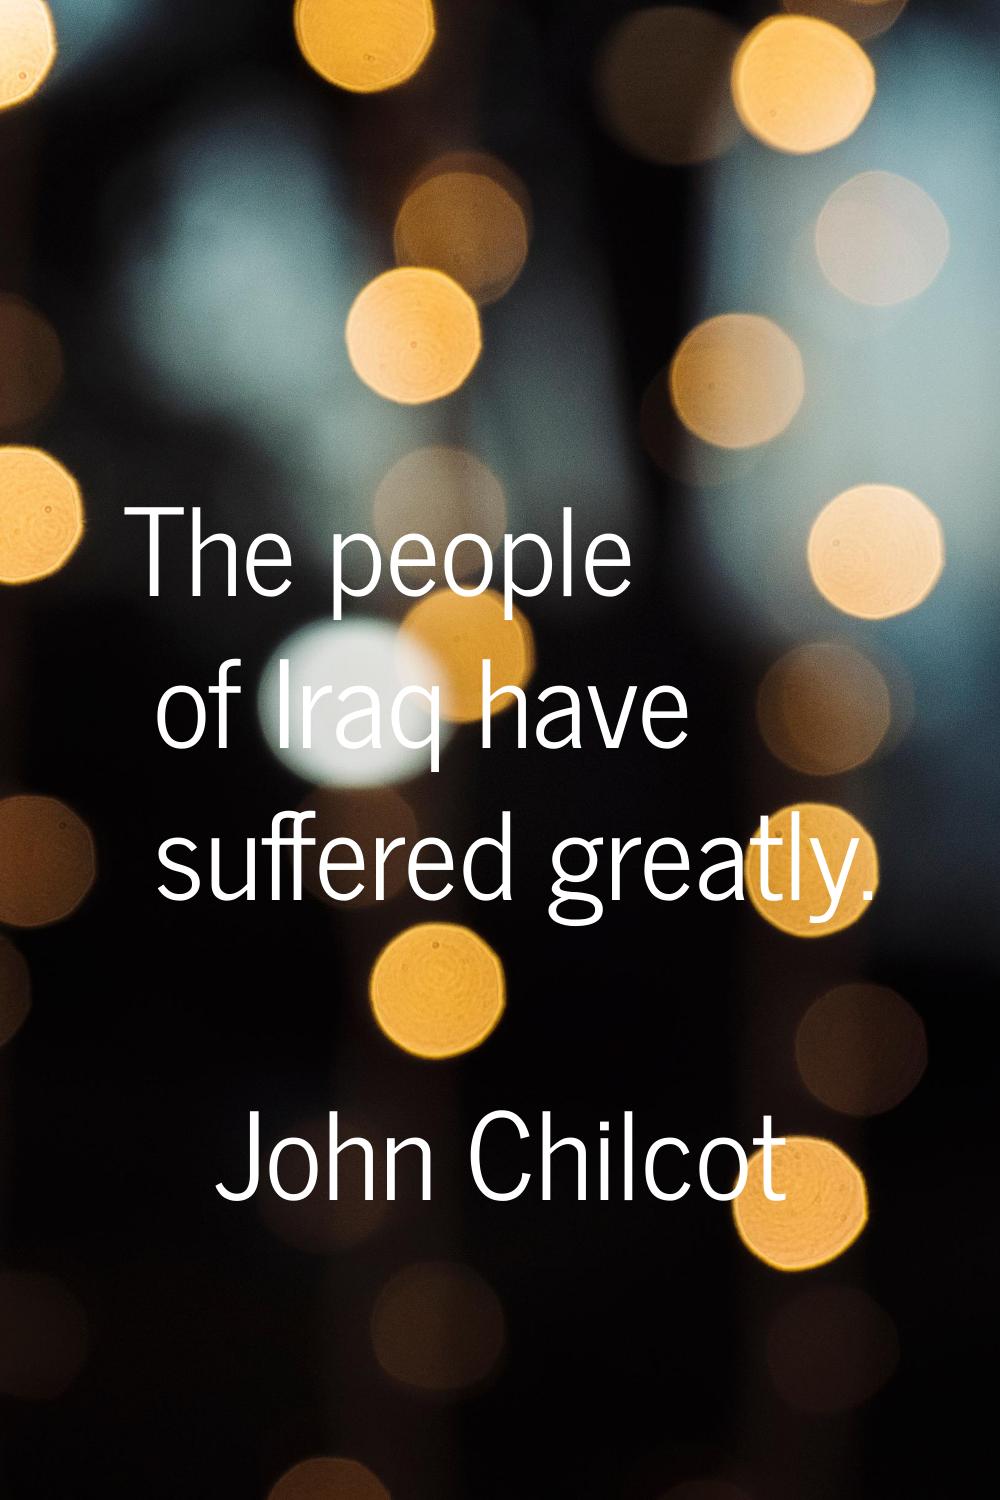 The people of Iraq have suffered greatly.